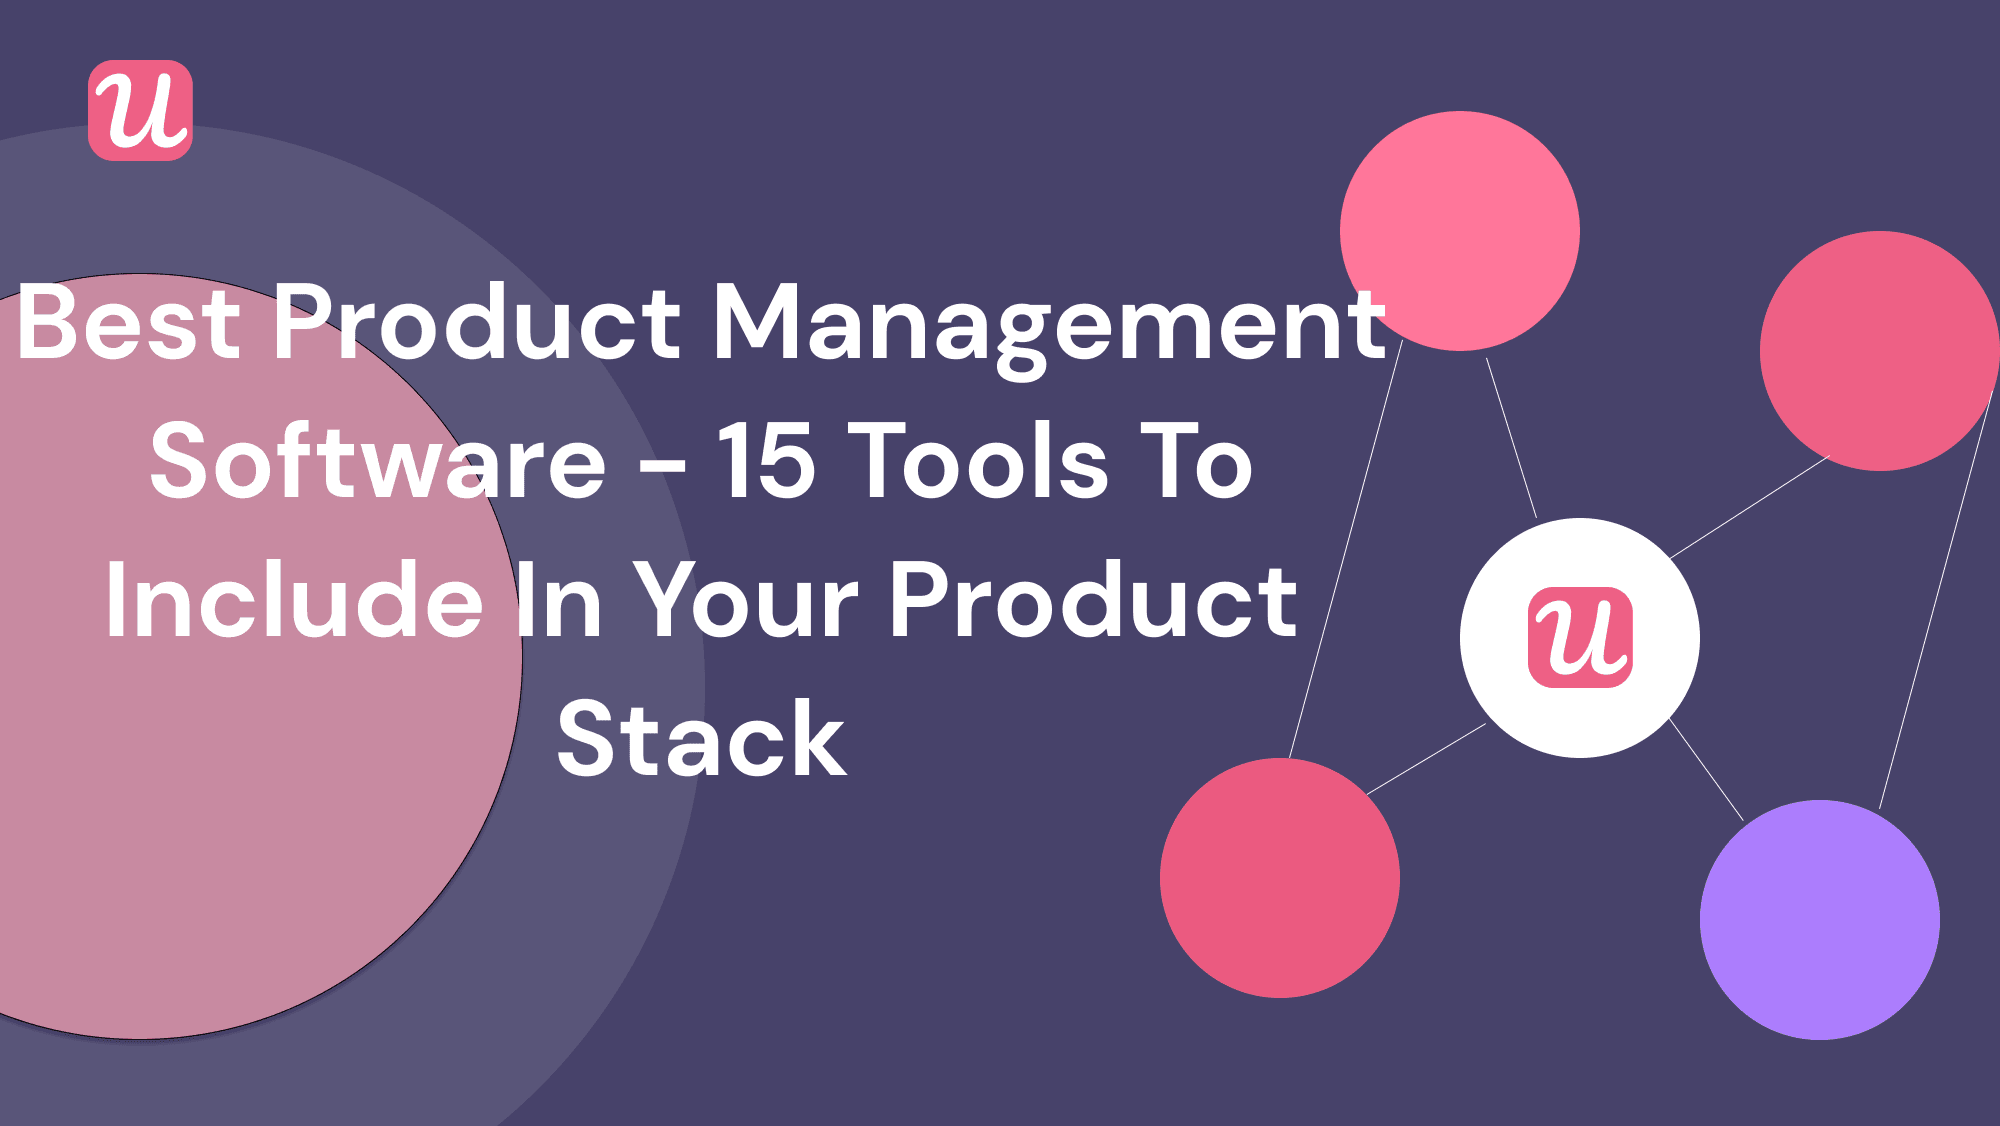 The 15 Best Product Management Software   To Include In Your Product Stack